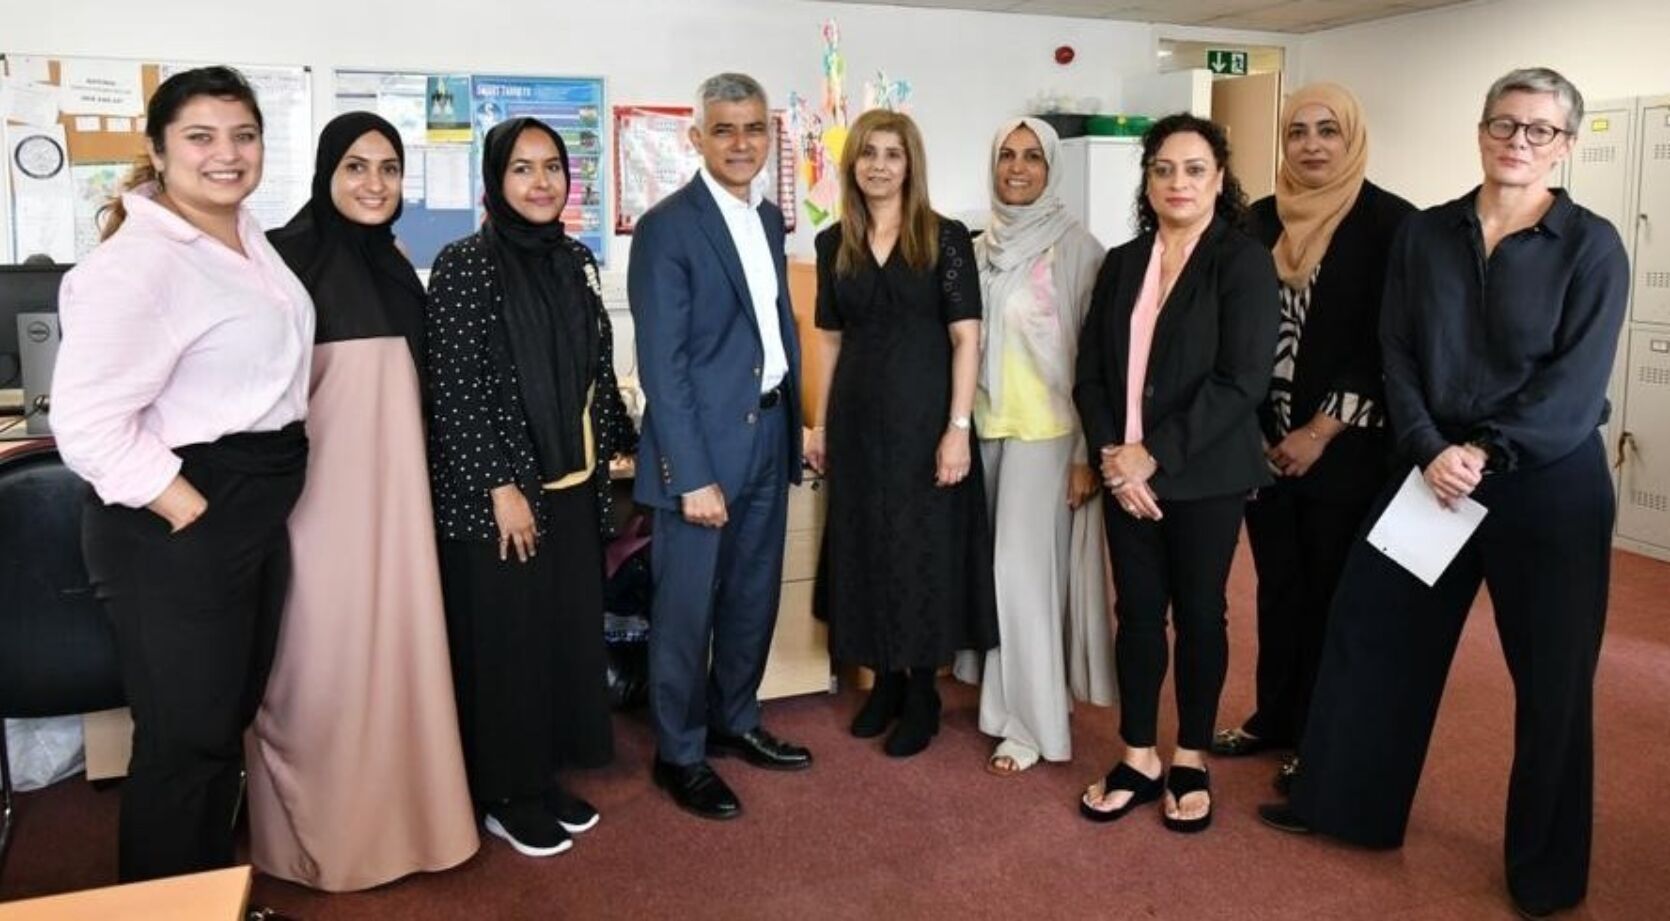 Members of the team from Kiran Support Services standing together in a line with the Mayor of London, Sadiq Khan, and The London Community Foundation CEO Kate Markey at their offices in Waltham Forest.